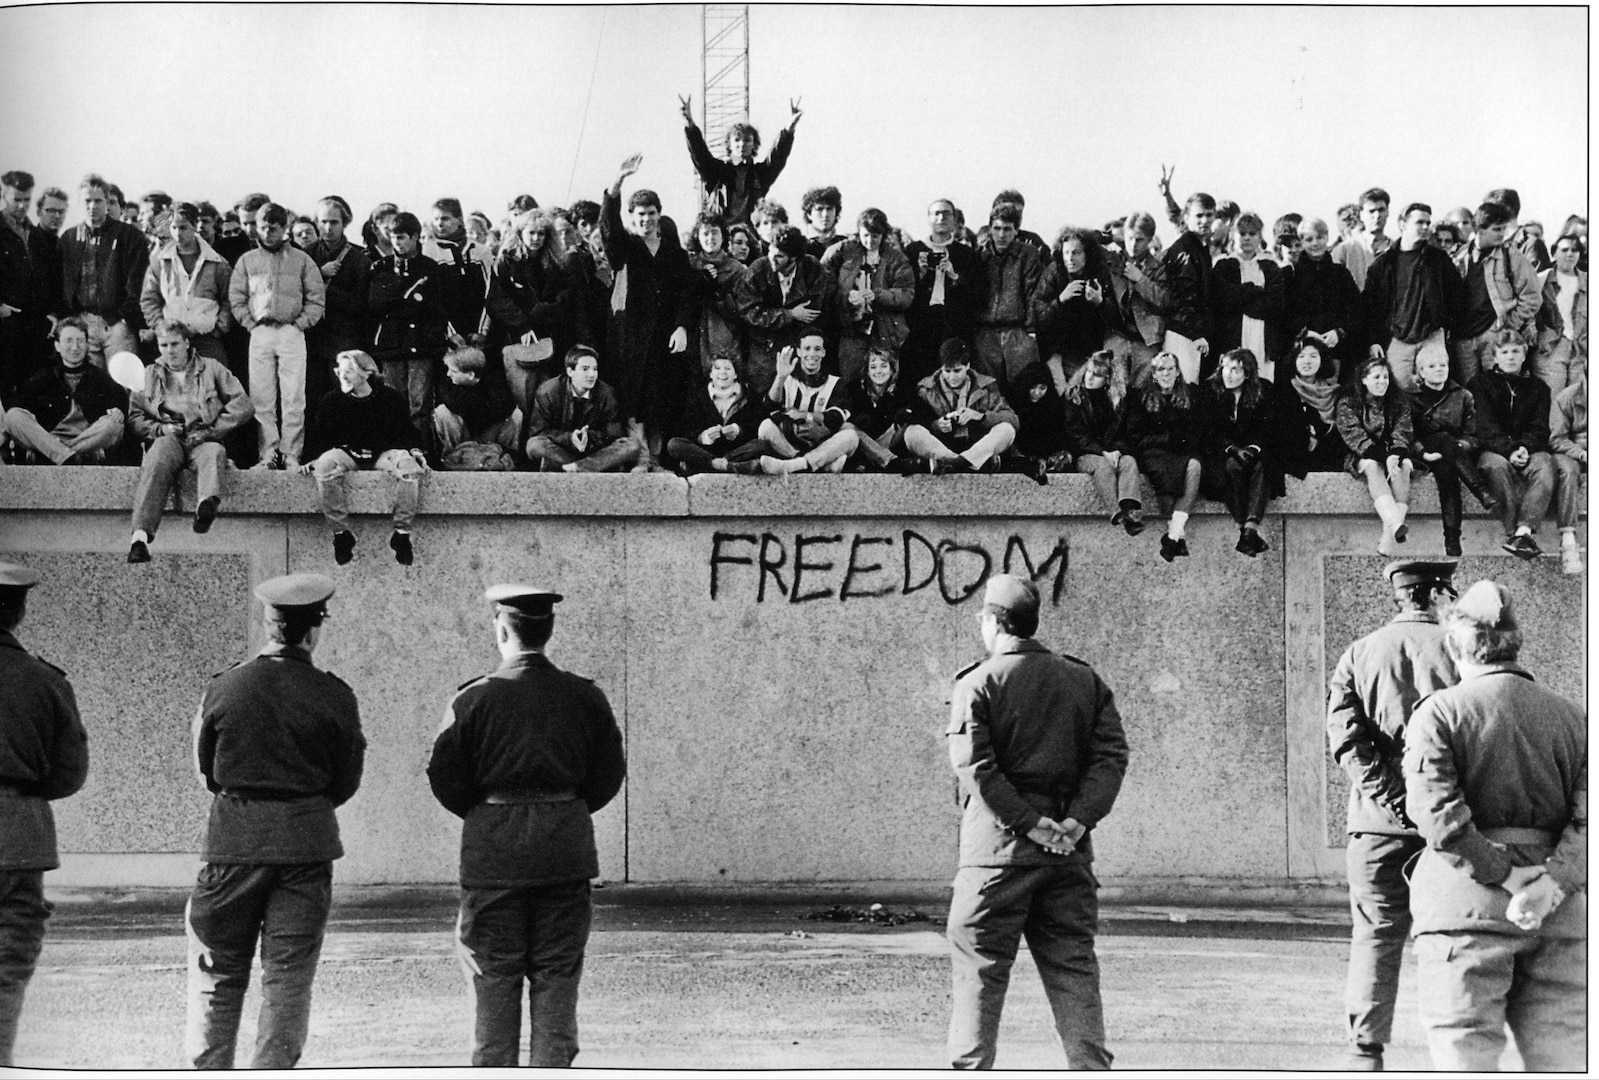 In November, 1989, East German students sit atop the Berlin Wall at the Brandenburg Gate in front of border guards. The destruction of the once-hated wall signaled the end of a divided Germany.

